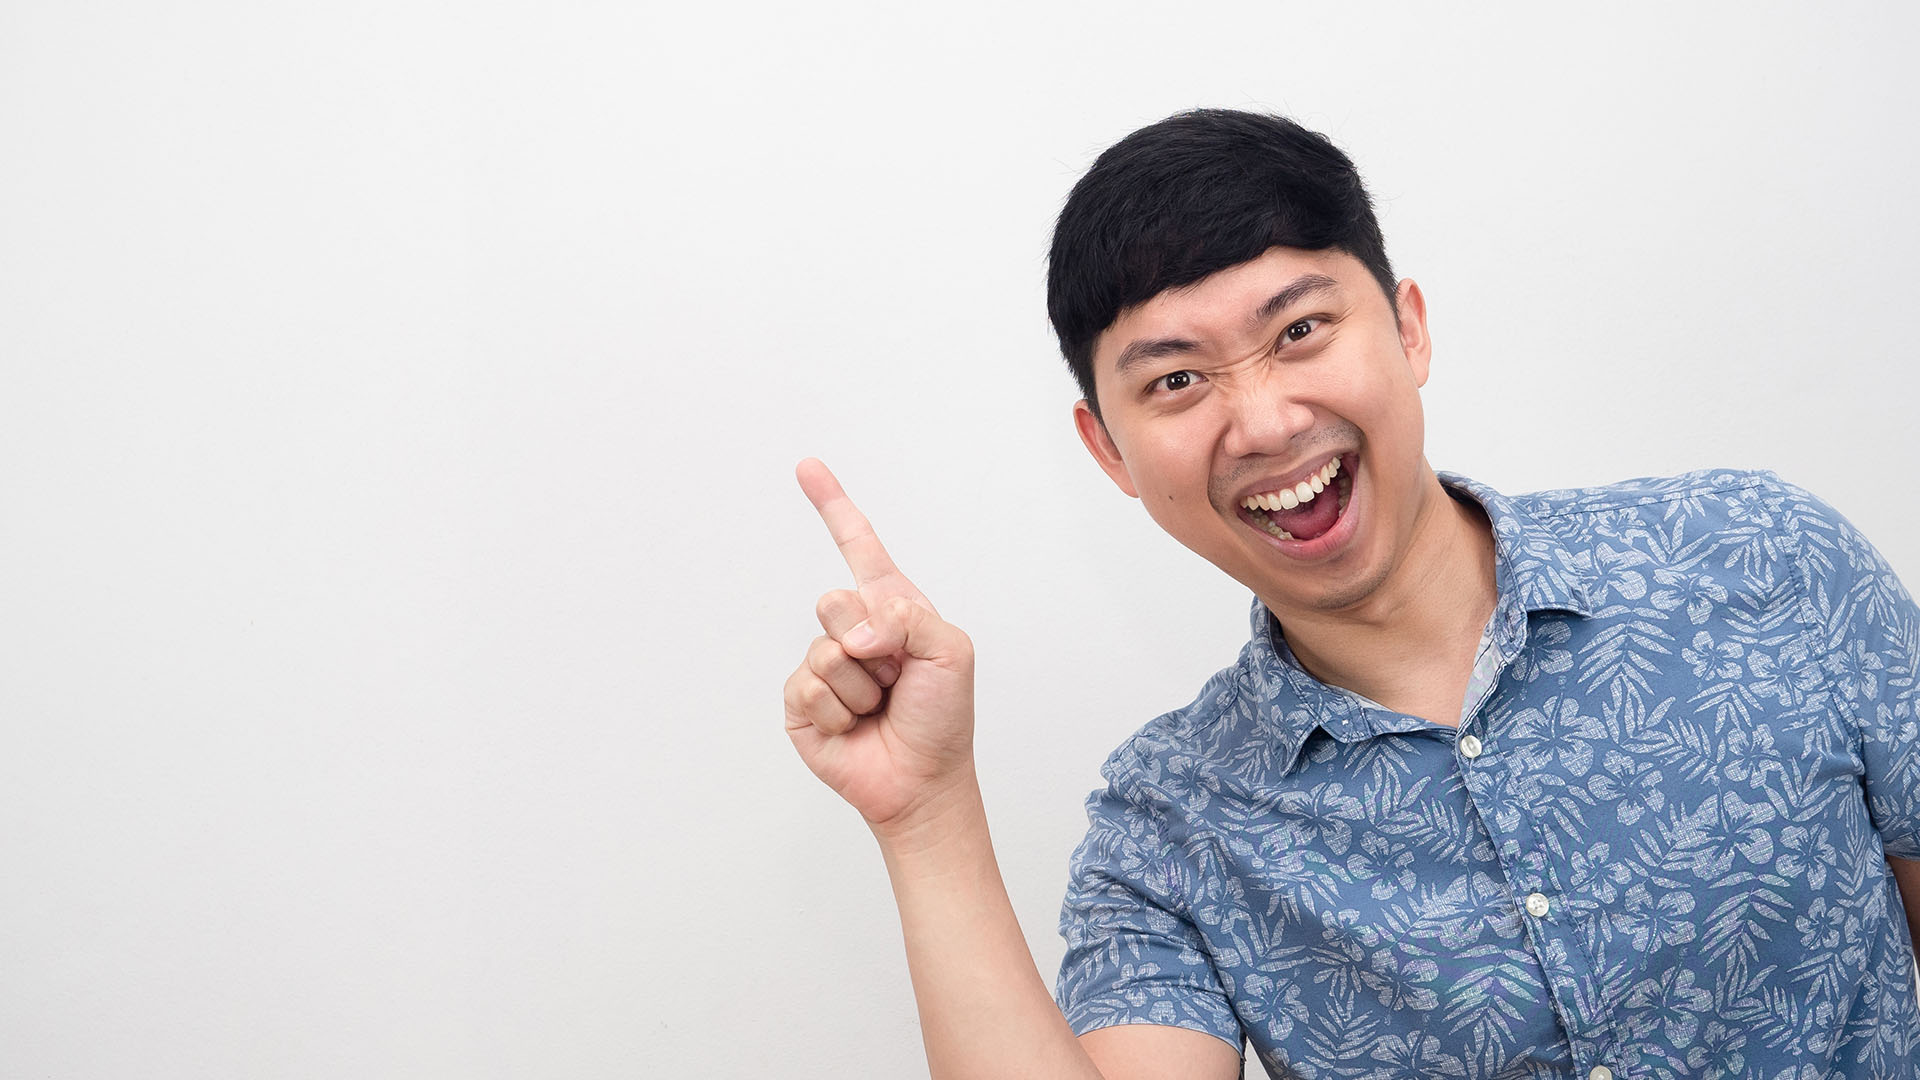 Brunette asian man in flower-print blue shirt, pointing his index finger upwards and smiling. White background.